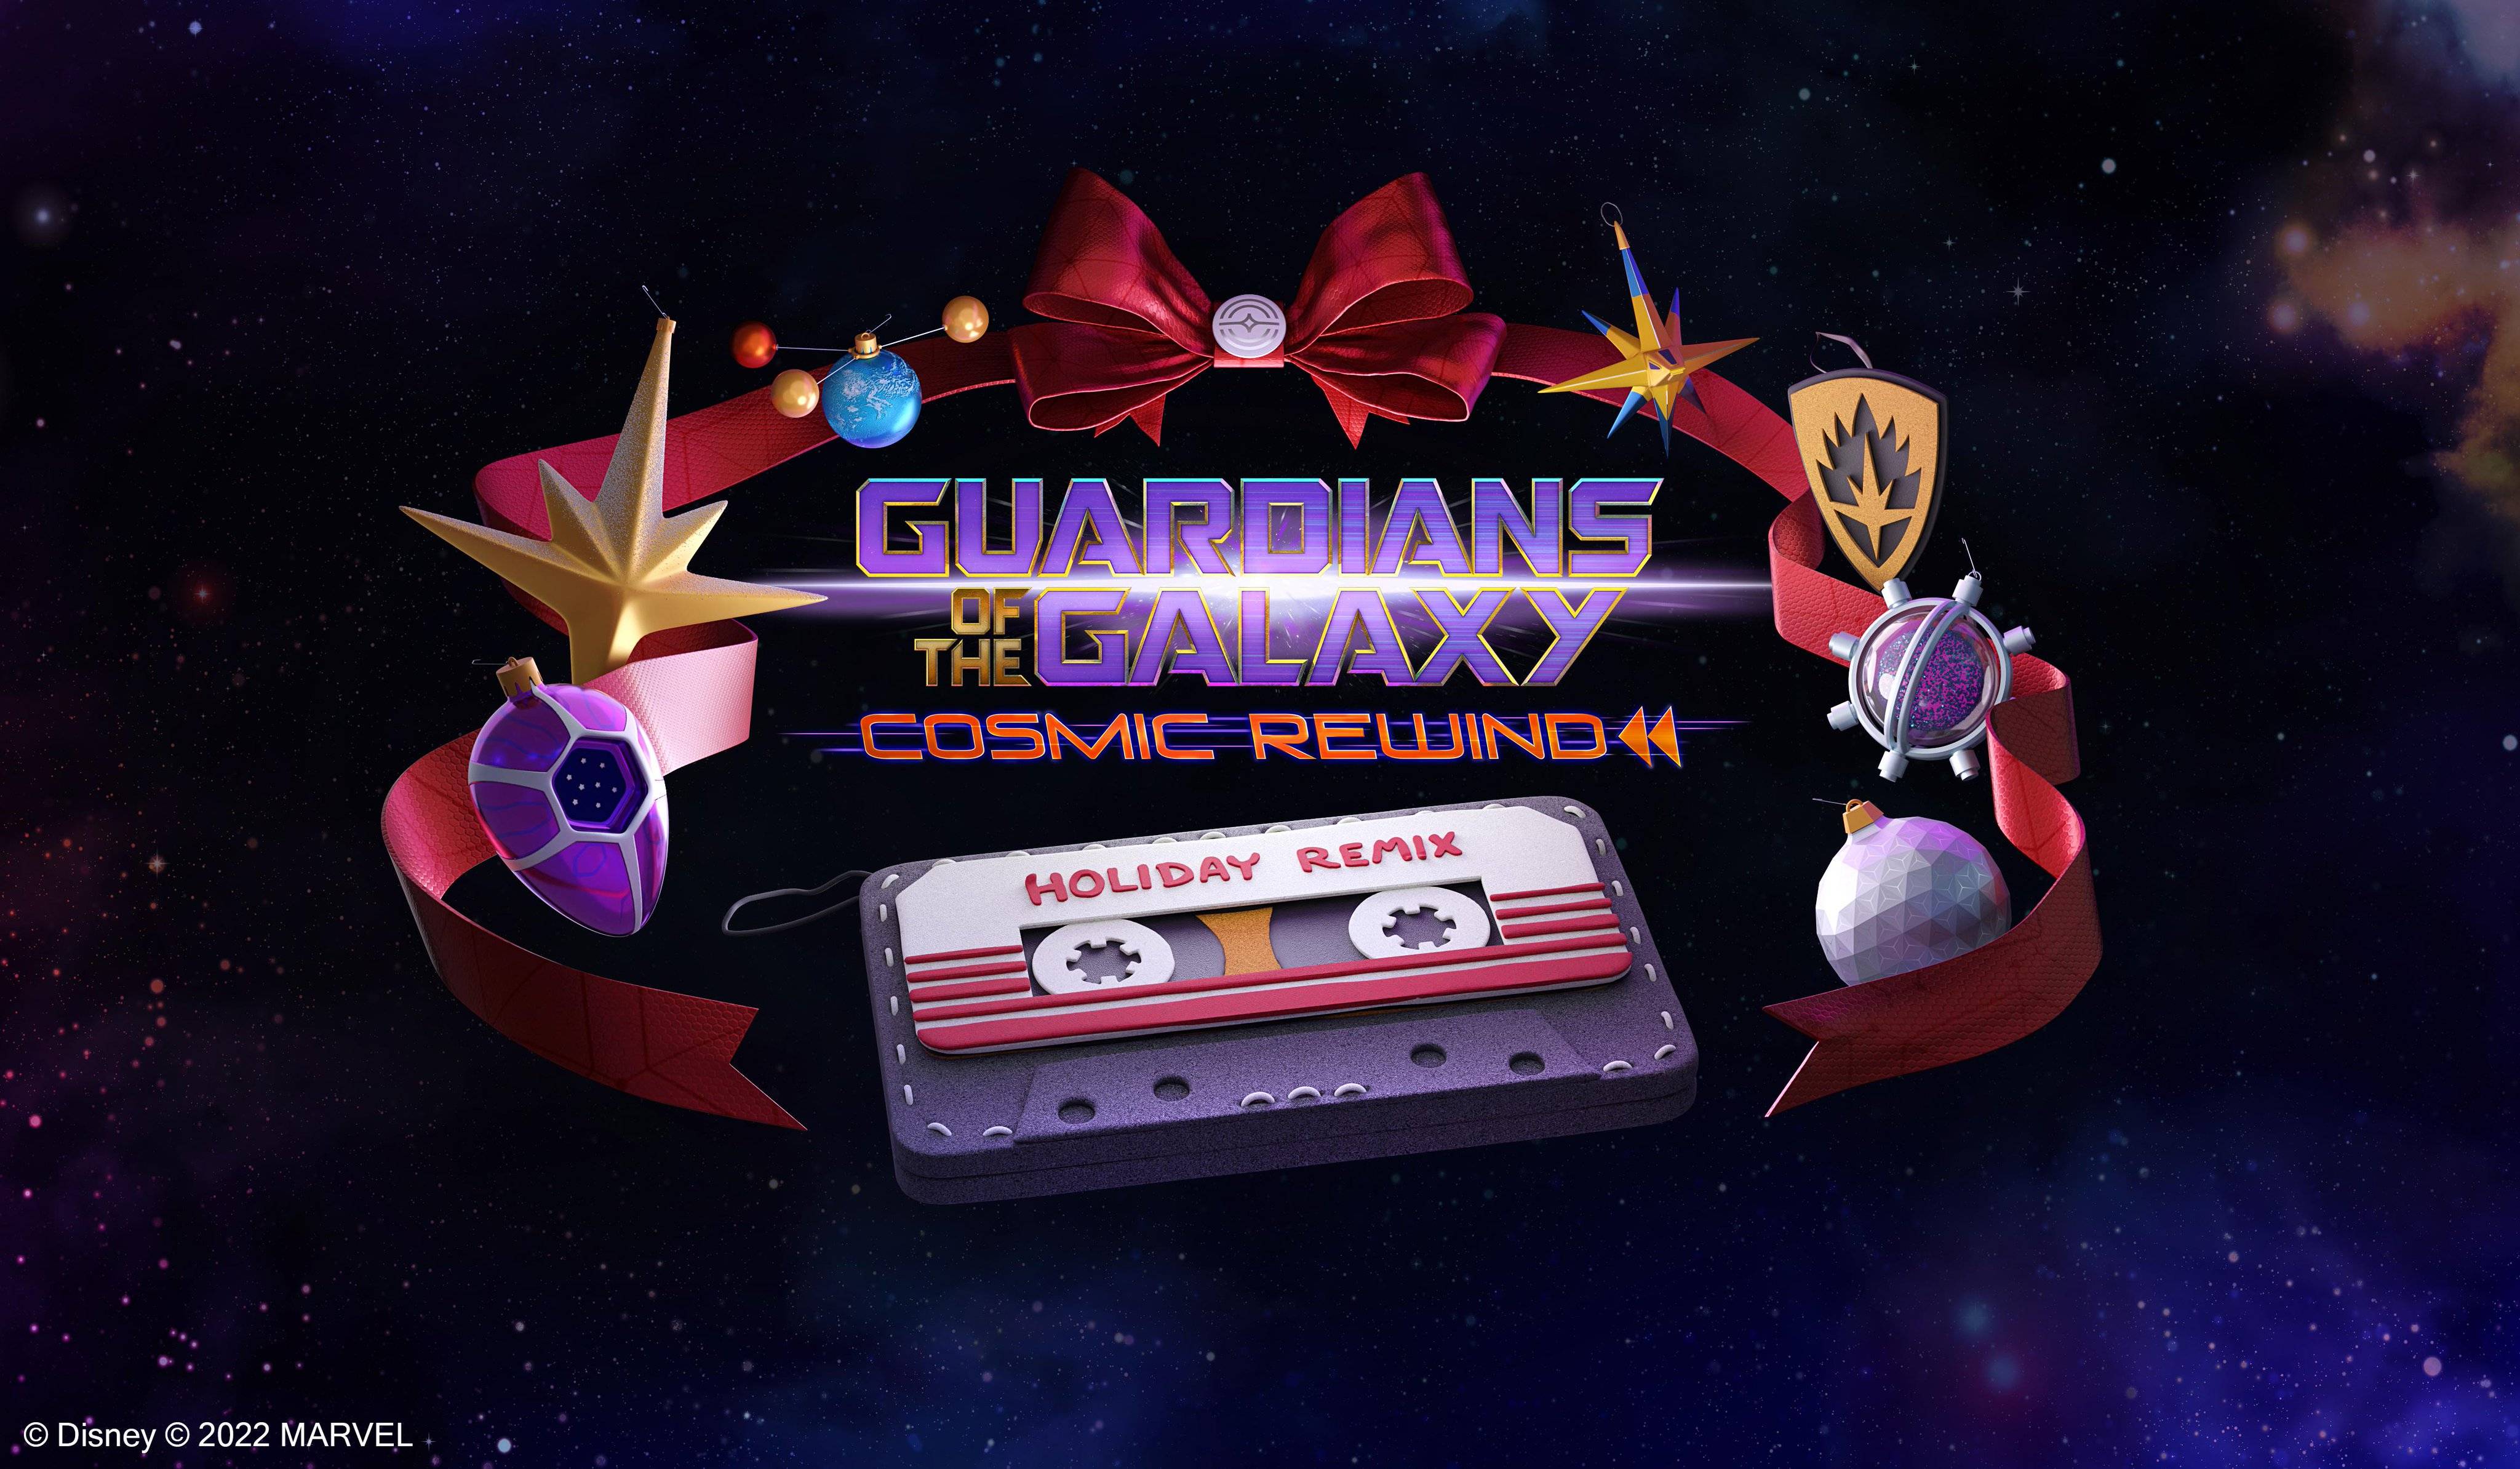 EPCOT's Guardians of the Galaxy Cosmic Rewind skips Holiday Remix this season